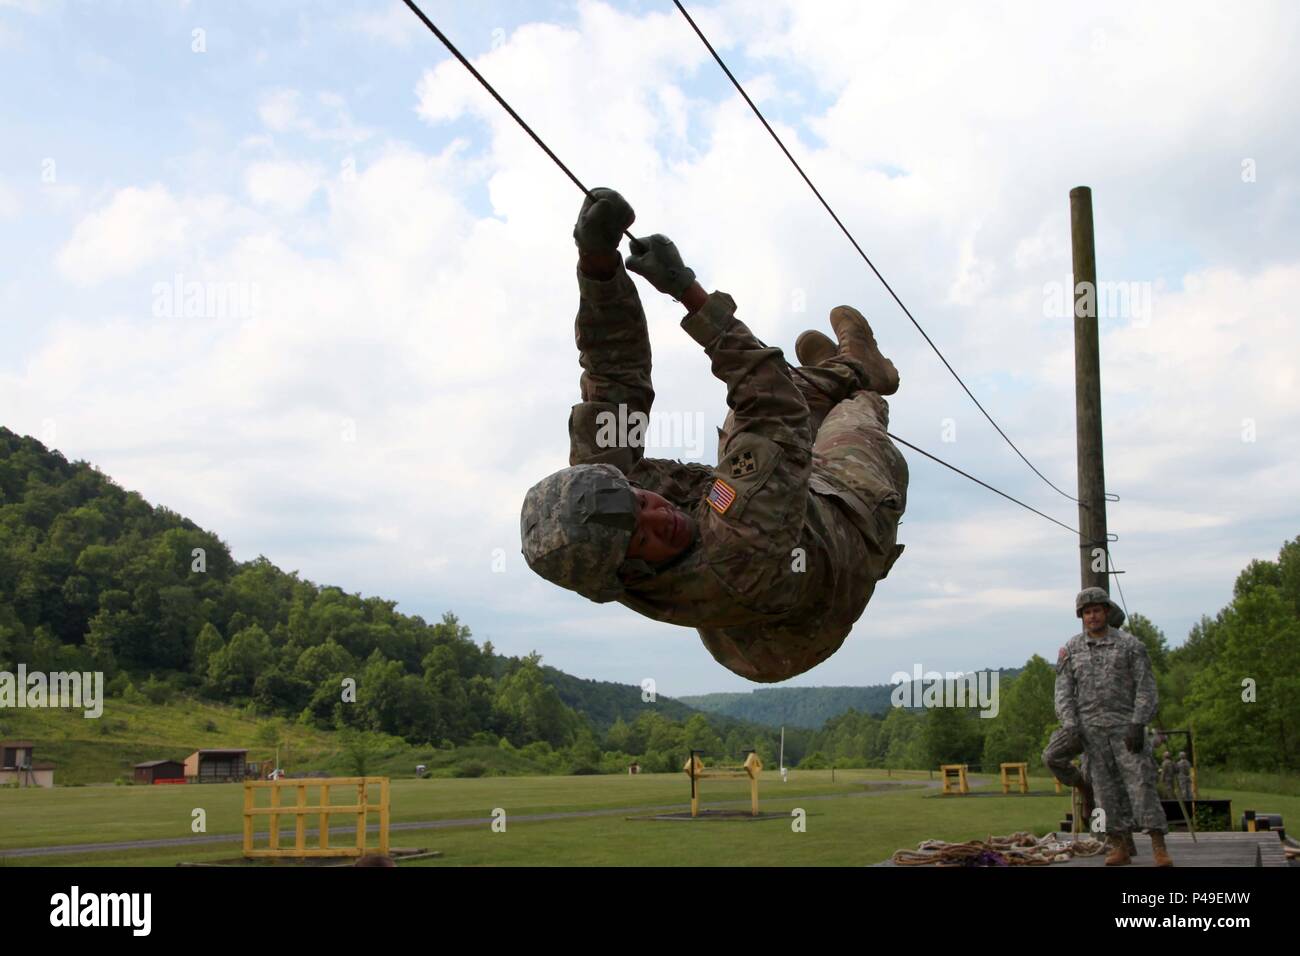 Making his way across a wire obstacle, a psychological operations Soldier works with his team to complete a leader reaction course at Camp Dawson, West Virginia, June 11. During the unit’s mission readiness exercise, 6th Military Information Support Battalion, 4th Military Information Support Group, validated military information support teams that will augment Special Operations Command Europe in the coming months on their tactical tasks, language proficiency and cultural understanding. (U.S. Army photo by Capt. Stephen Von Jett/Released) Stock Photo